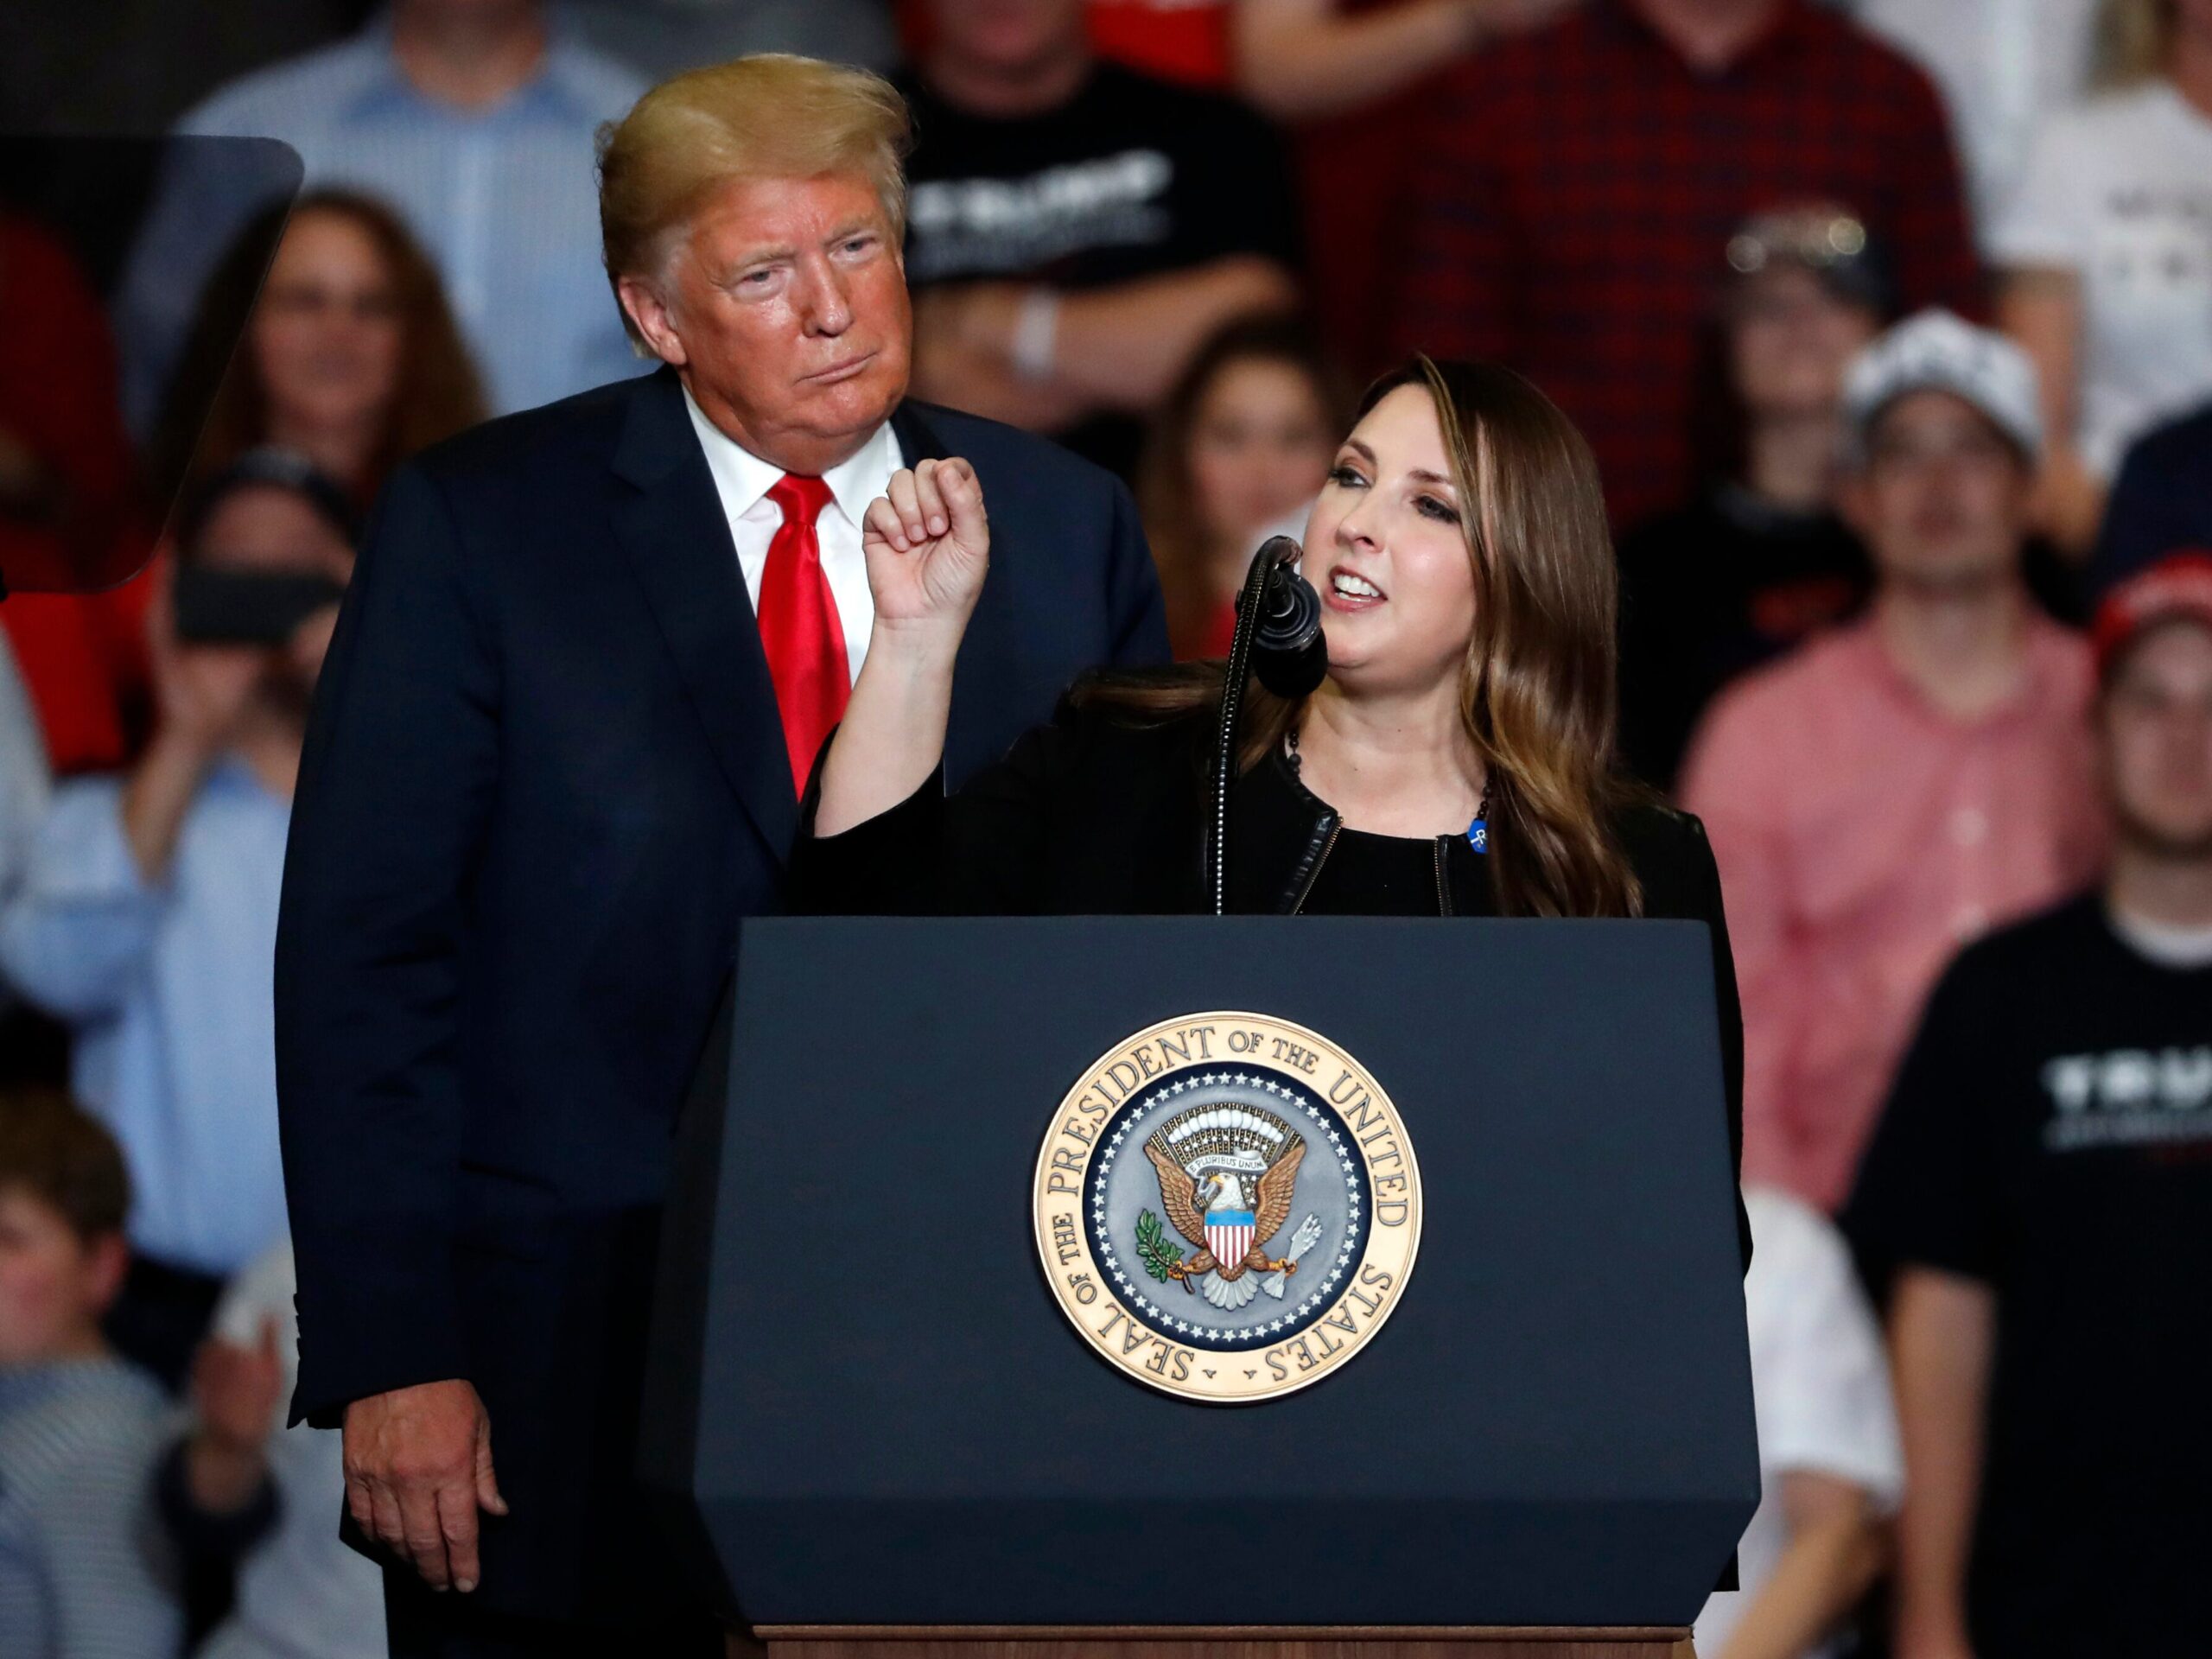 Republican National Committee (RNC) Chairwoman Ronna McDaniel will step down on March 8th, concluding her seven-year stint at the helm of the GOP. (AP Photo/Jeff Roberson, File)